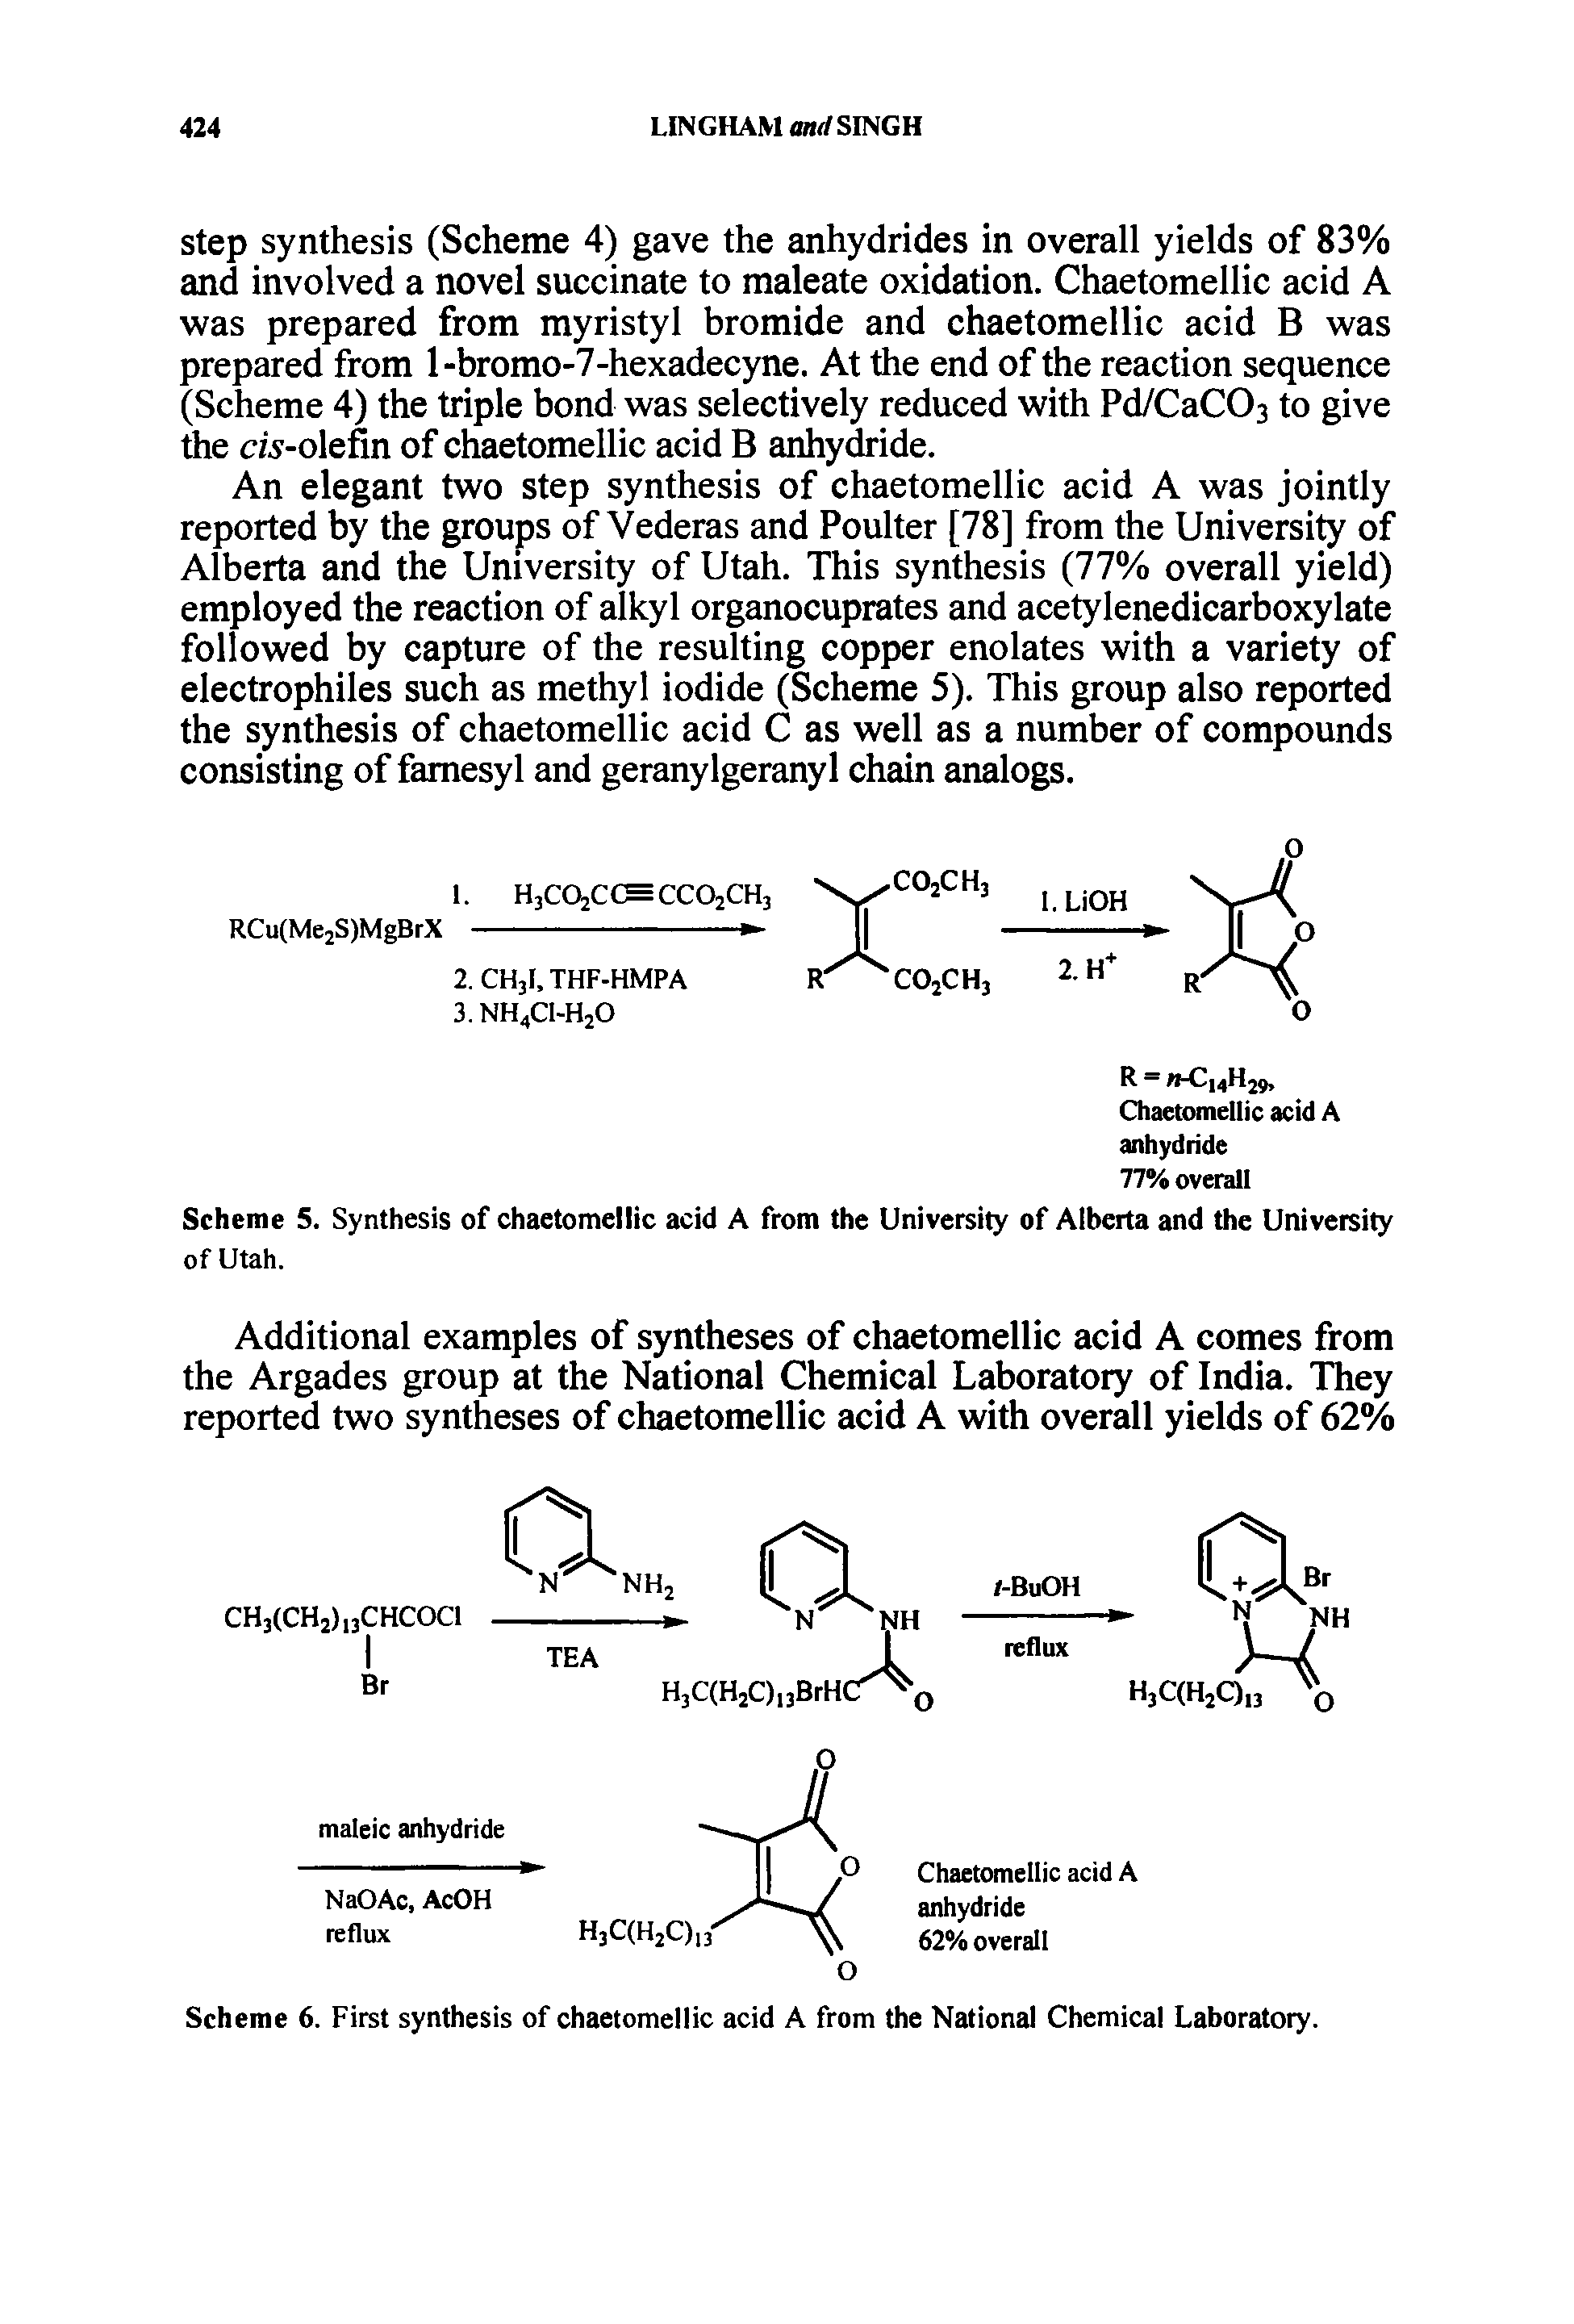 Scheme 5. Synthesis of chaetomellic acid A from the University of Alberta and the University of Utah.